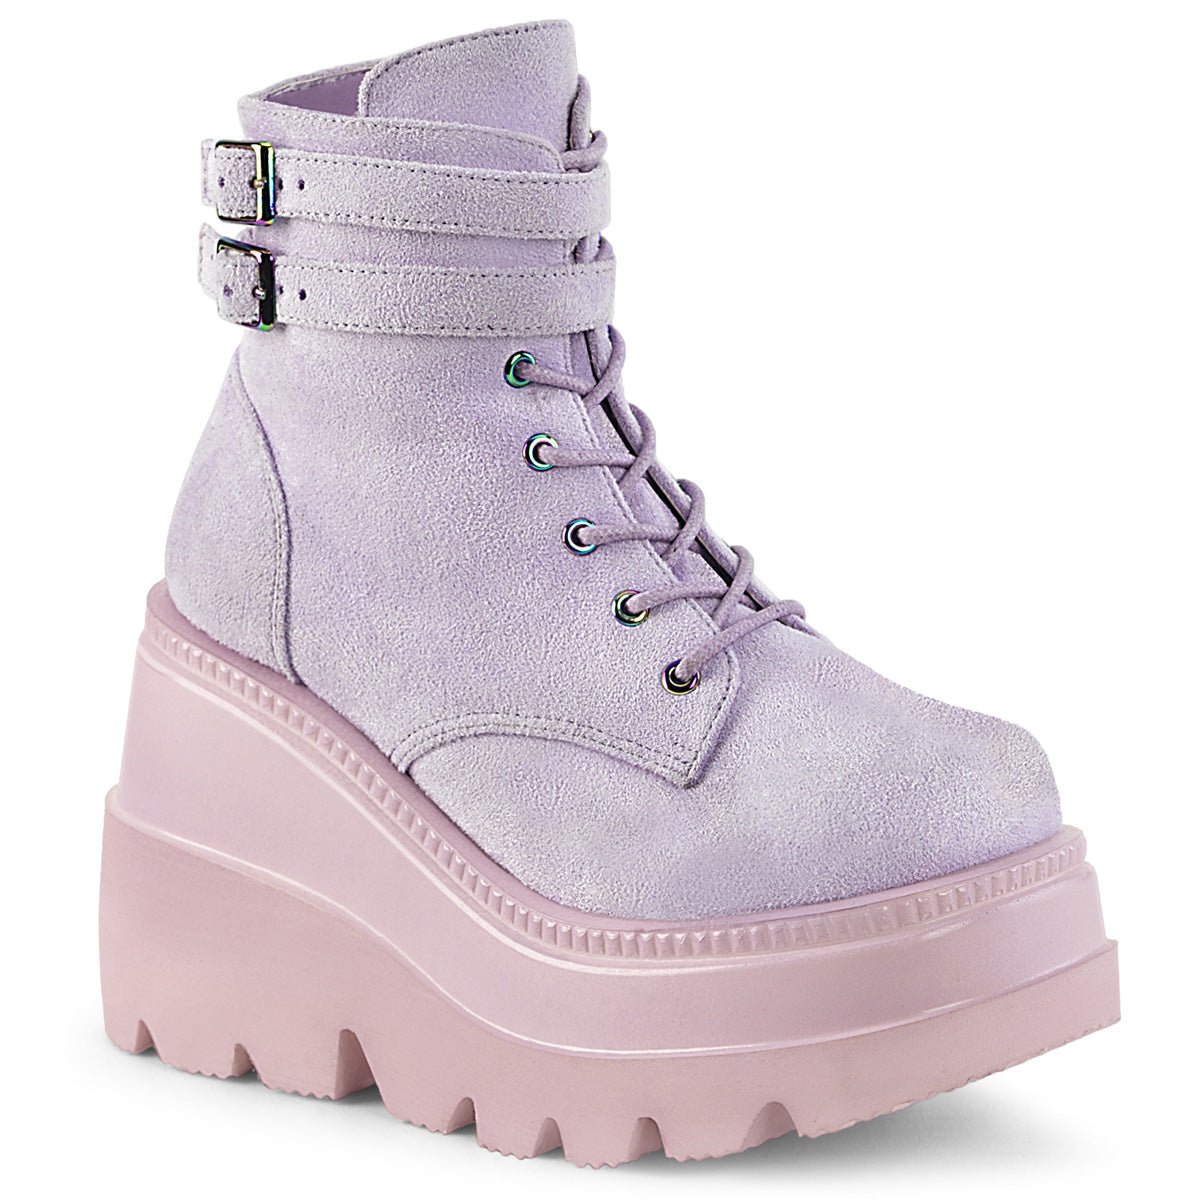 Too Fast | Demonia Shaker 52 | Lavender Vegan Suede Women's Ankle Boots